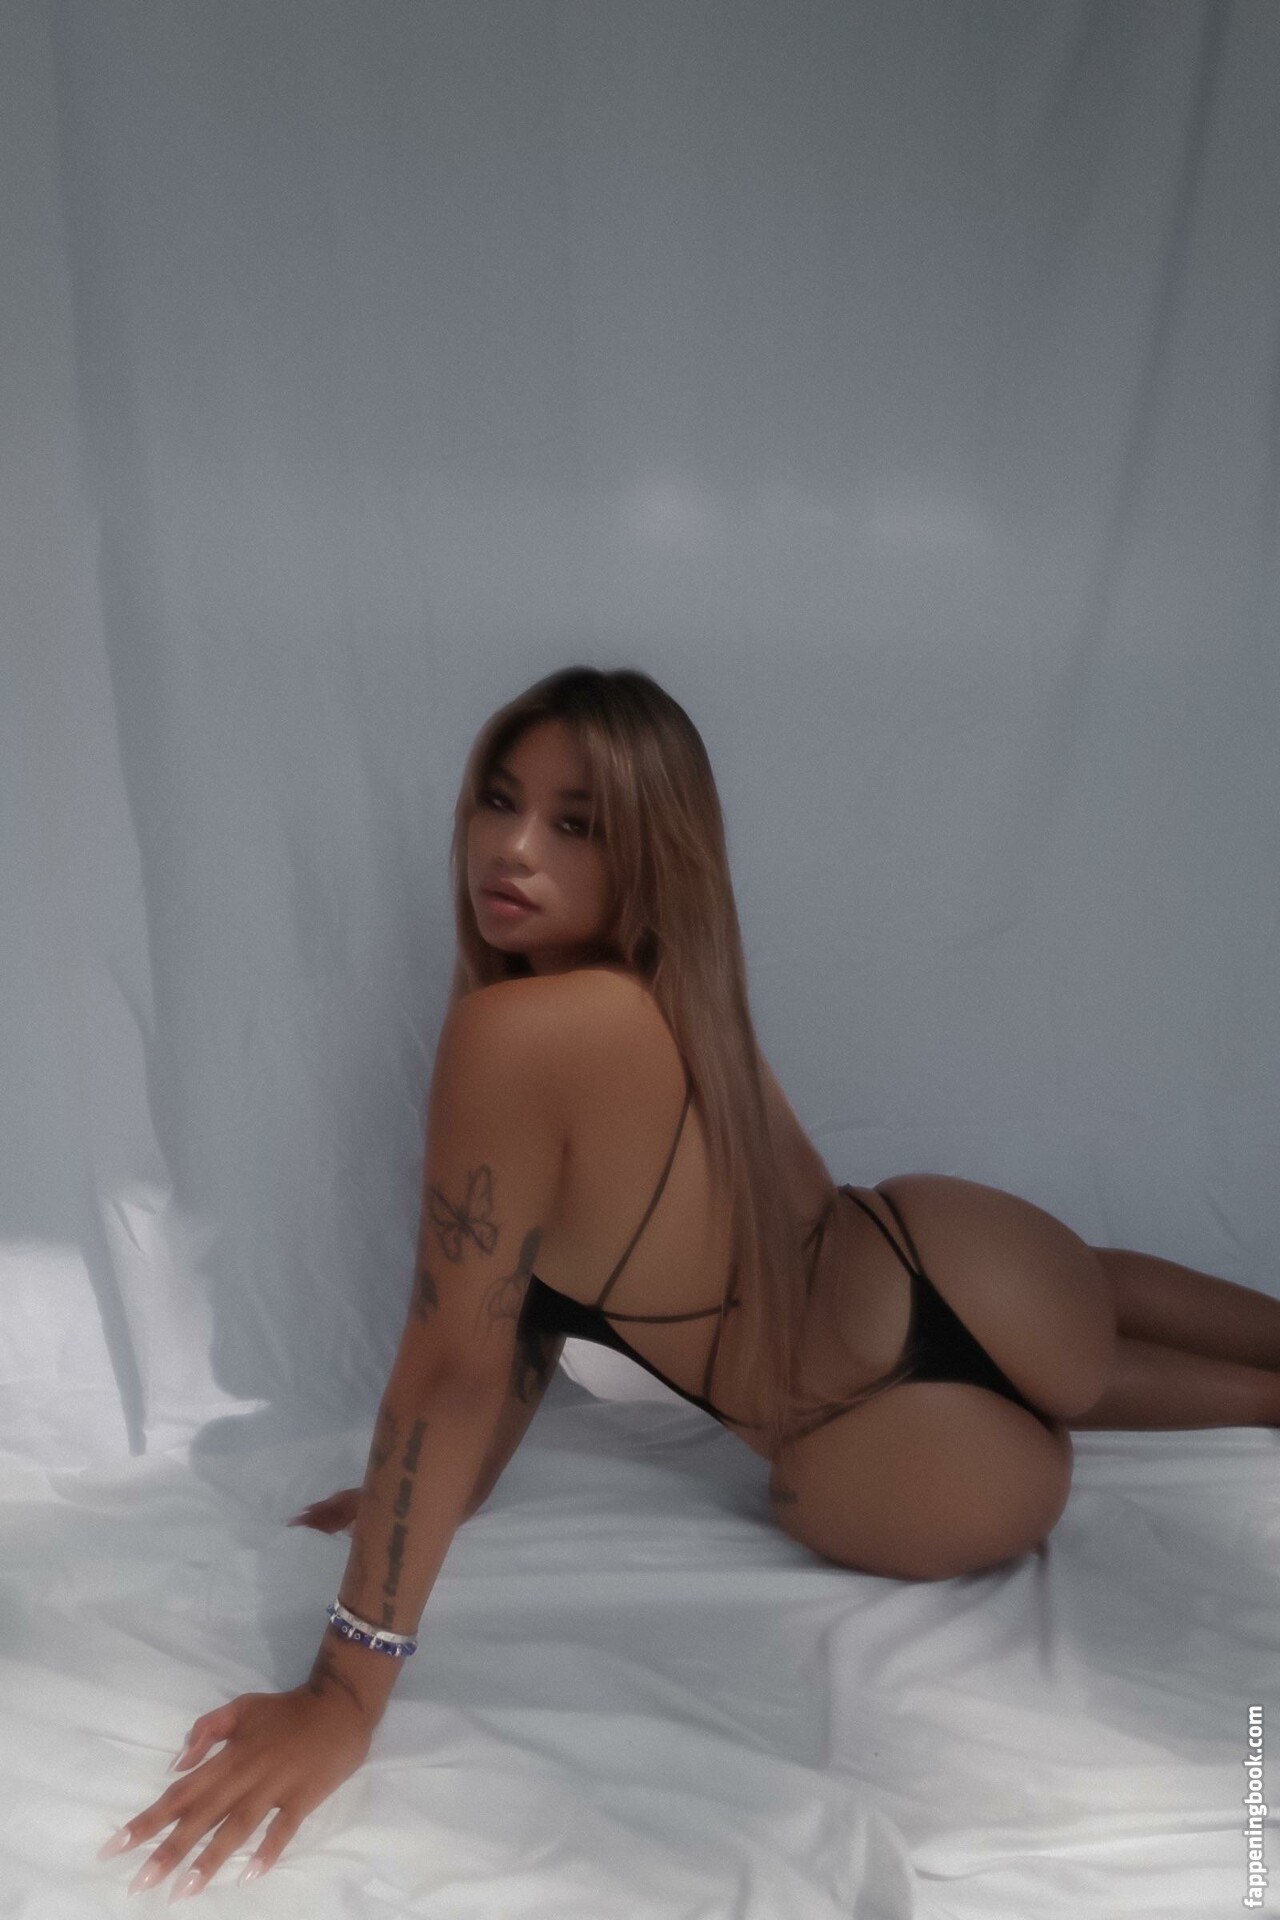 Lil6uapoo Nude OnlyFans Leaks